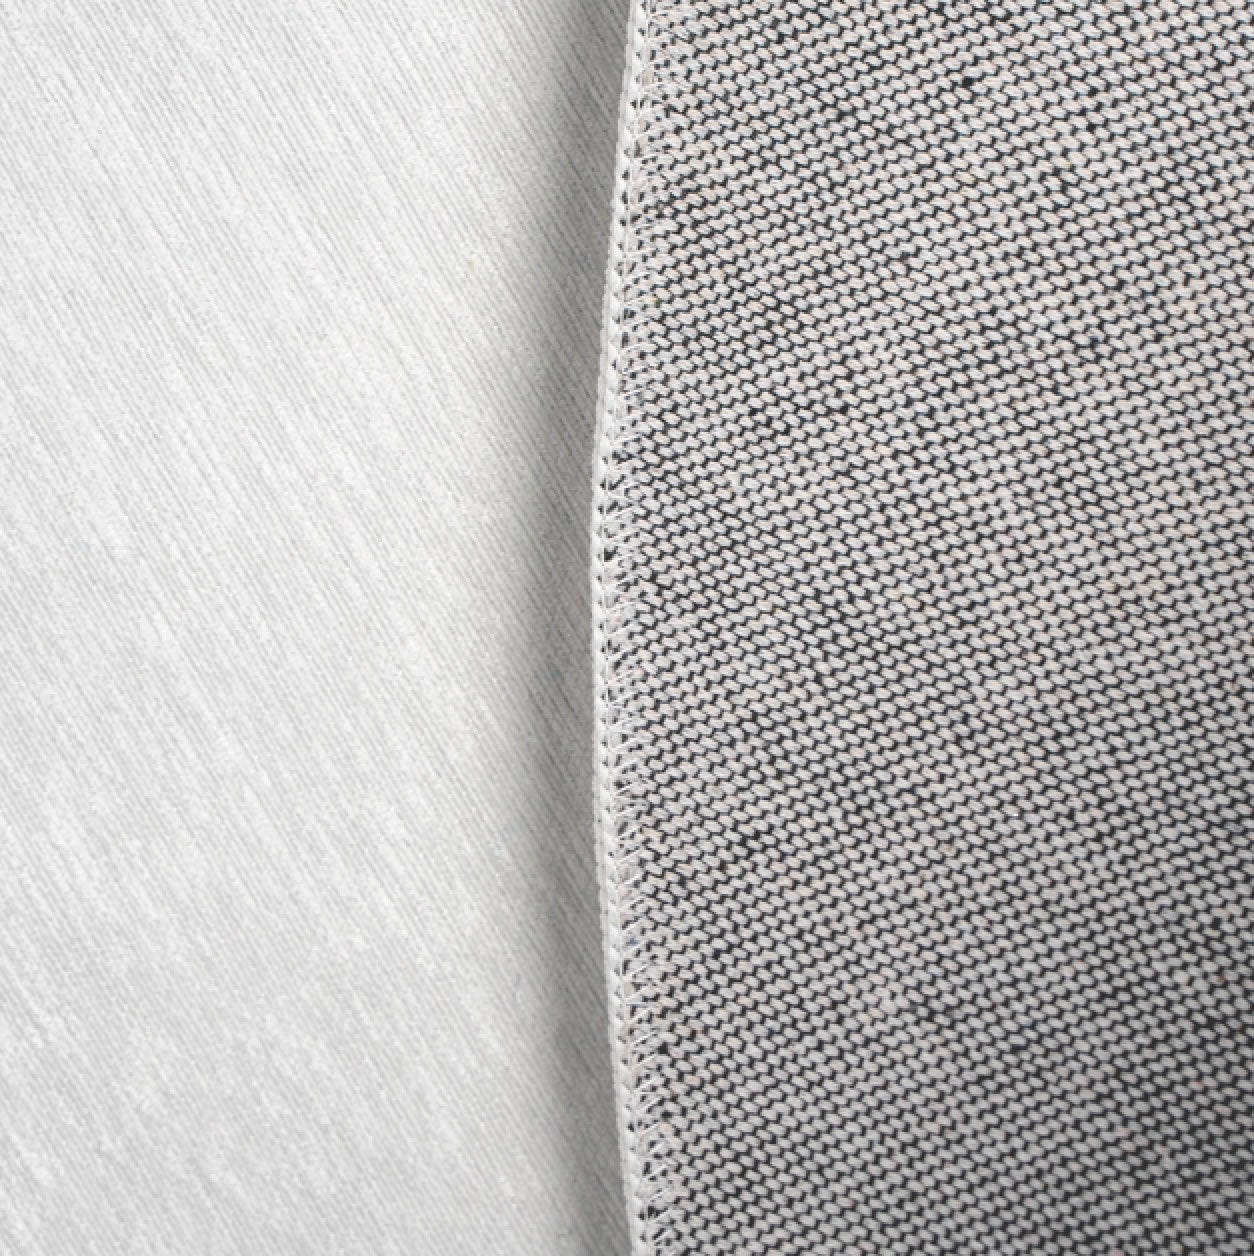 a close up of a tie on a white surface